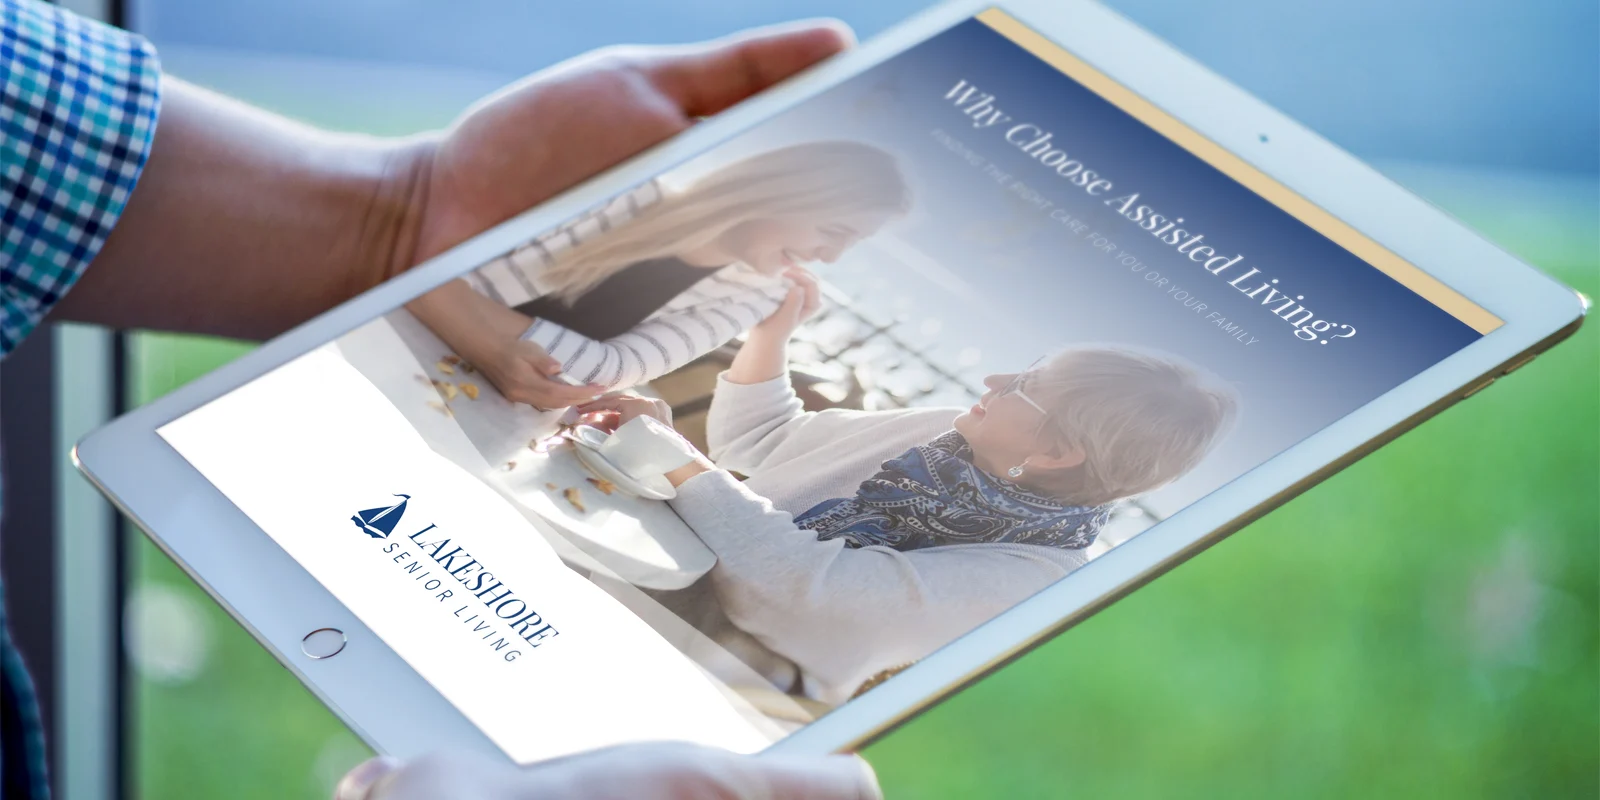 Why Choose Assisted Living? ebook